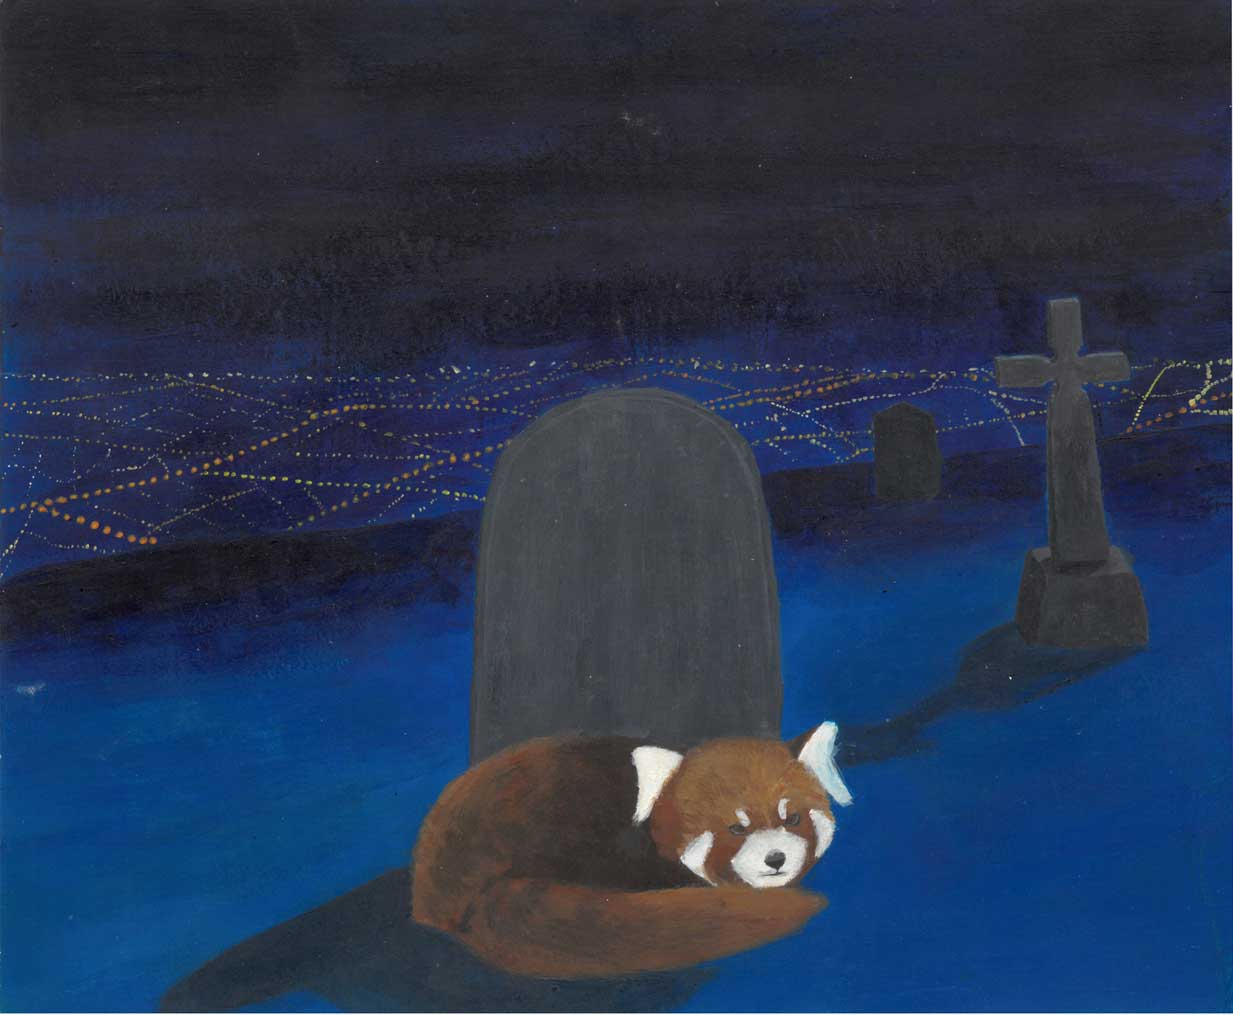 painting of a redpanda next to a grave, city lights in the background